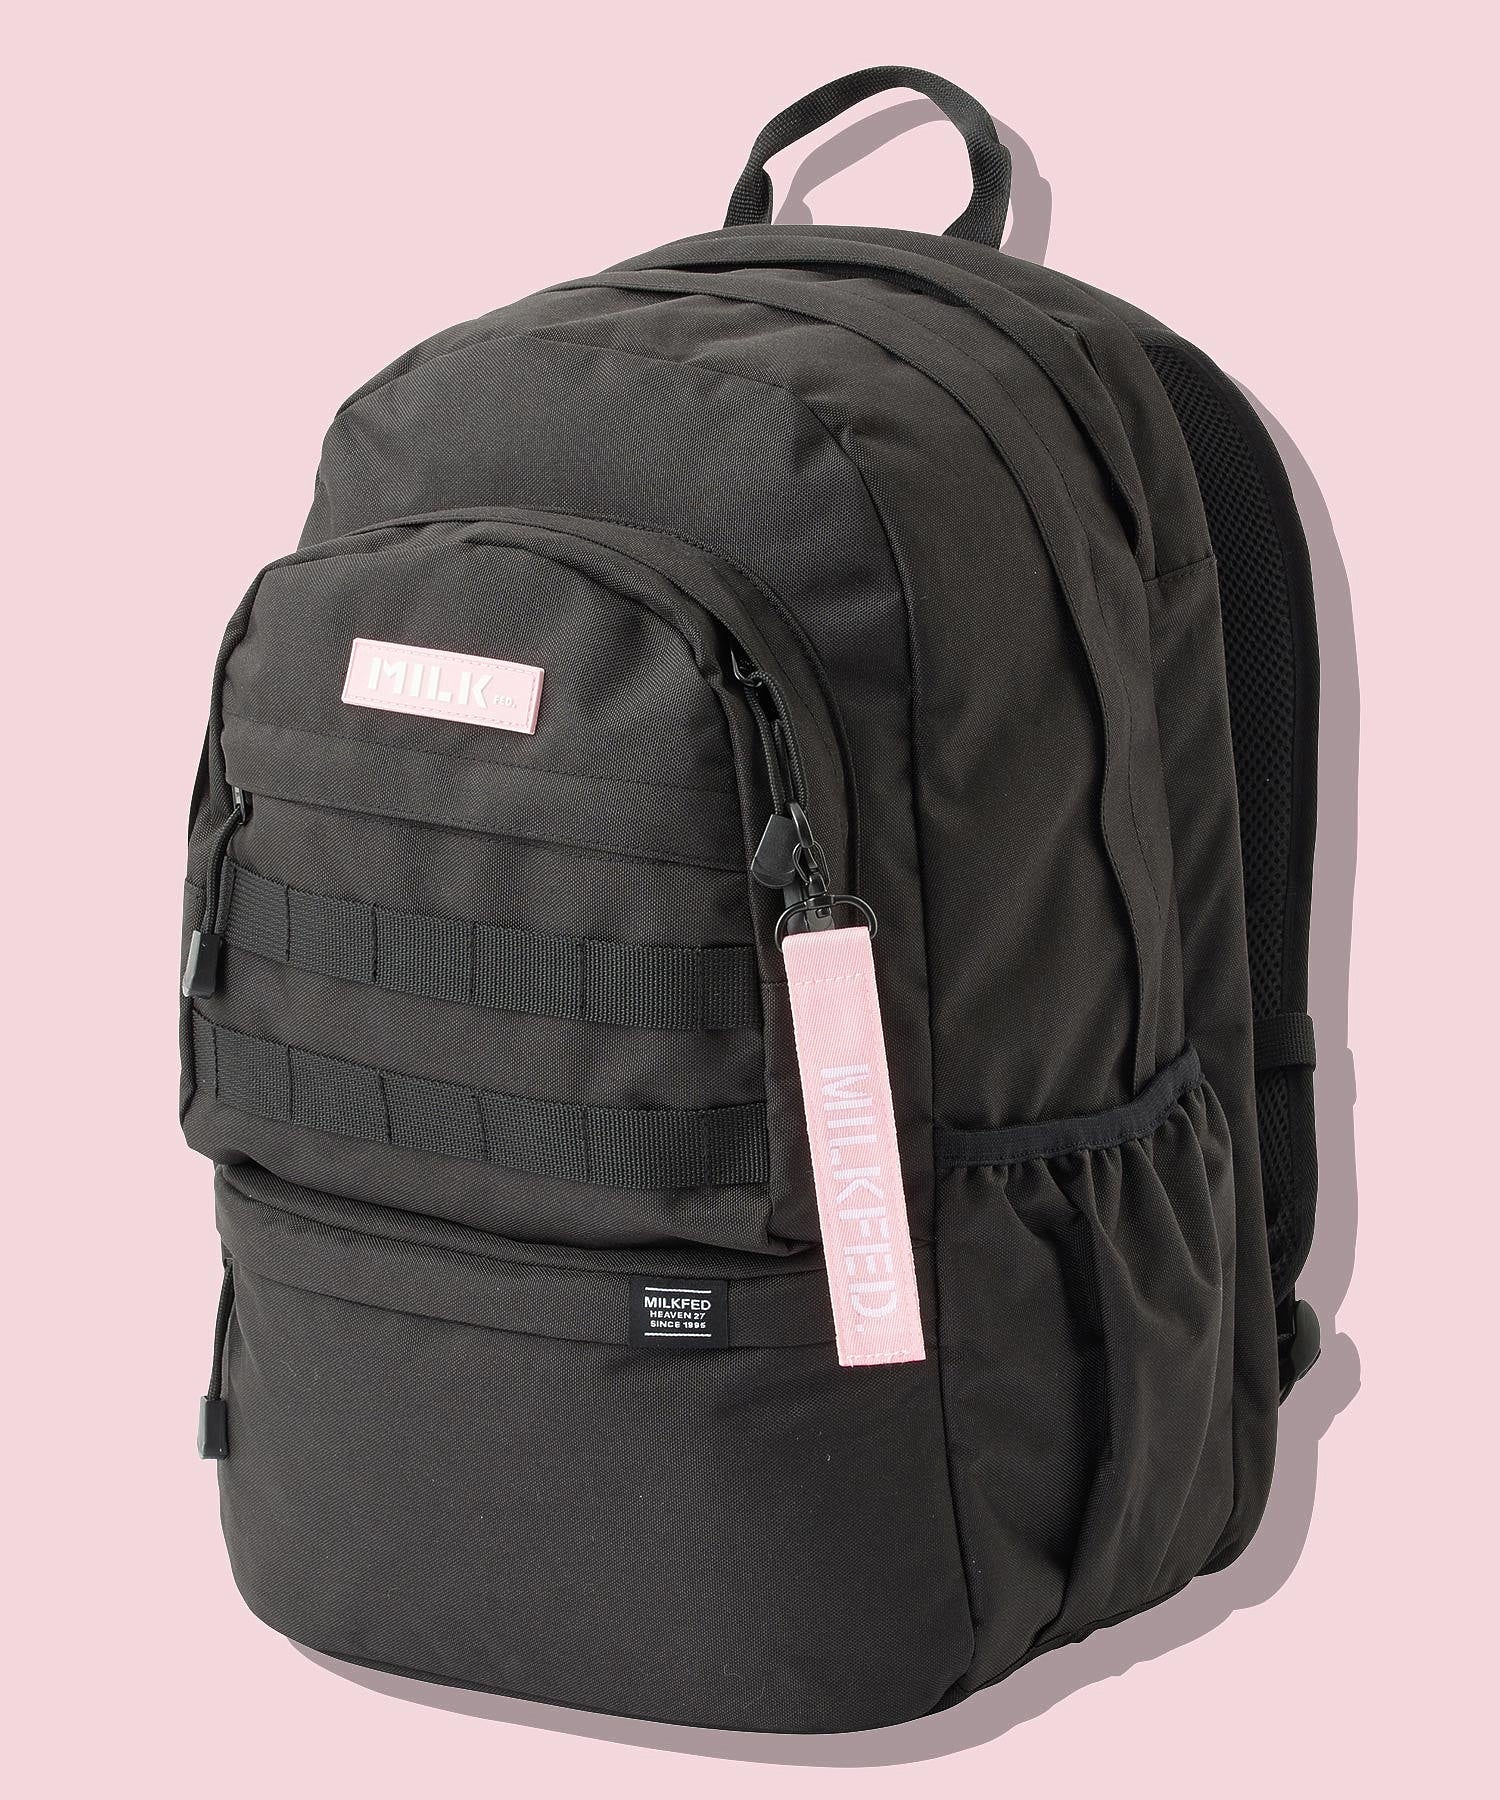 ACTIVE MOLLE BACKPACK MILKFED.